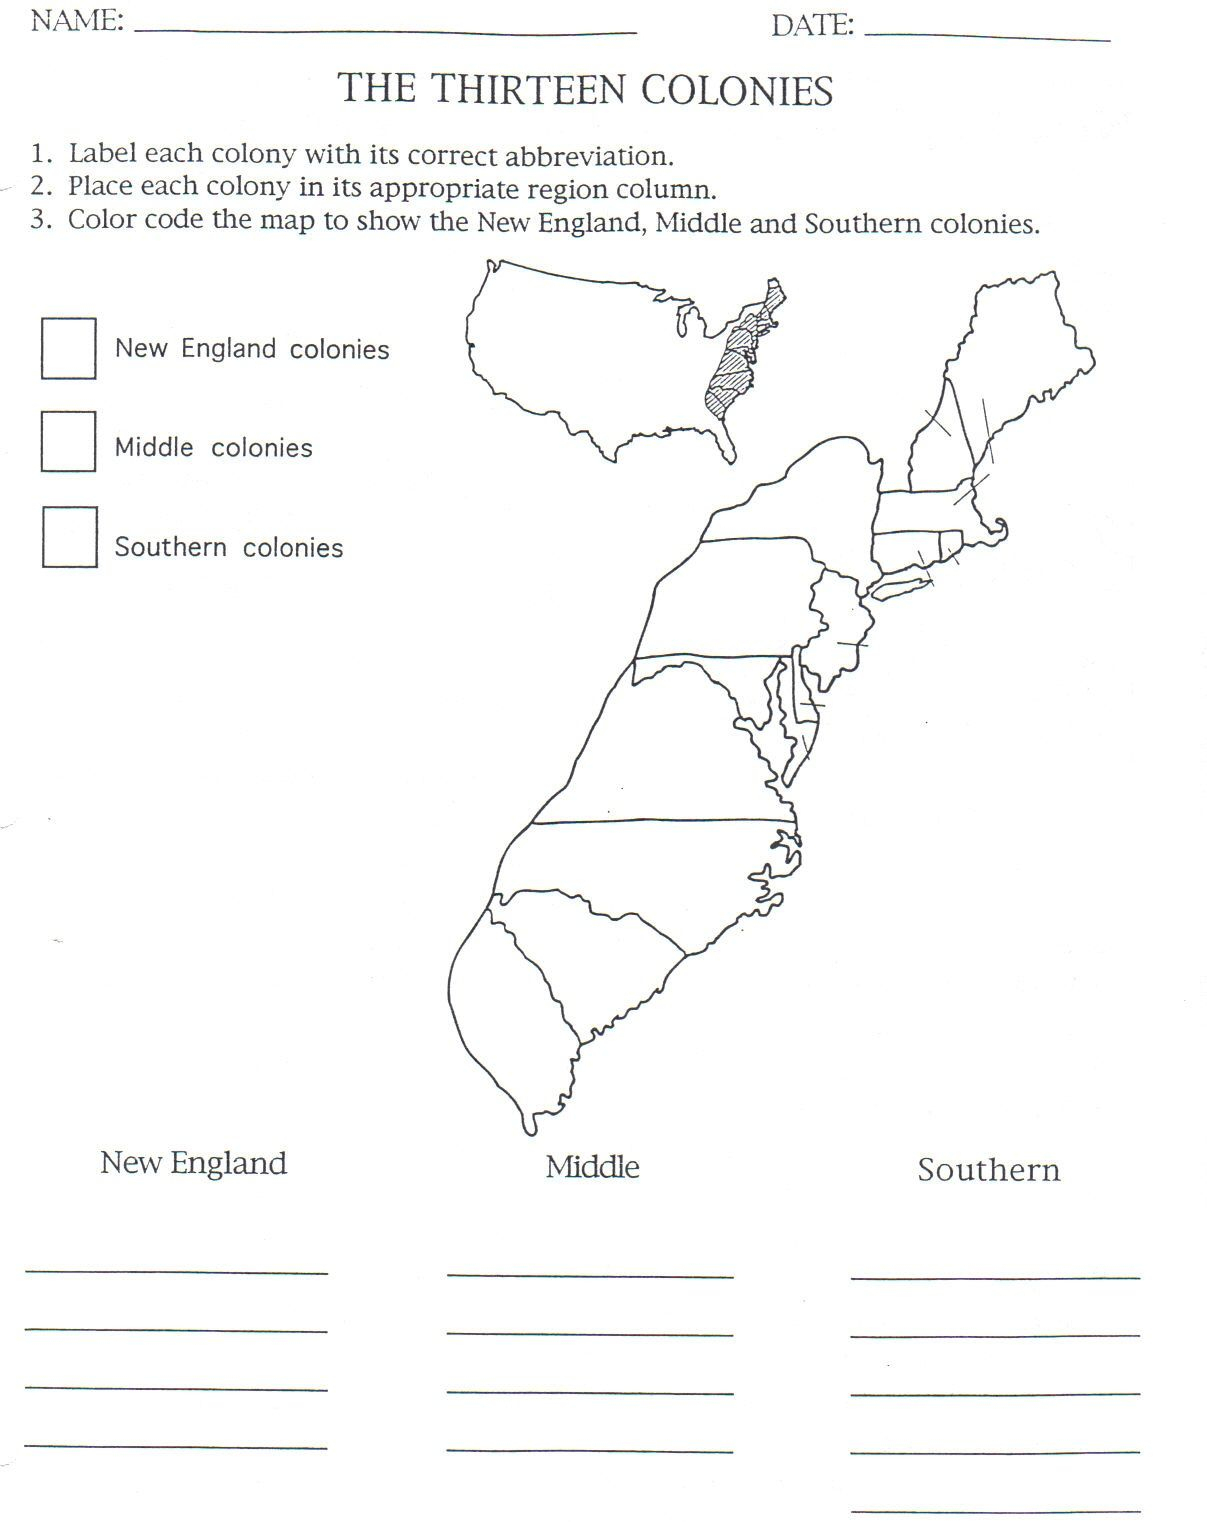 13 Colonies Map To Color And Label, Although Notice That They Have - 13 Colonies Blank Map Printable